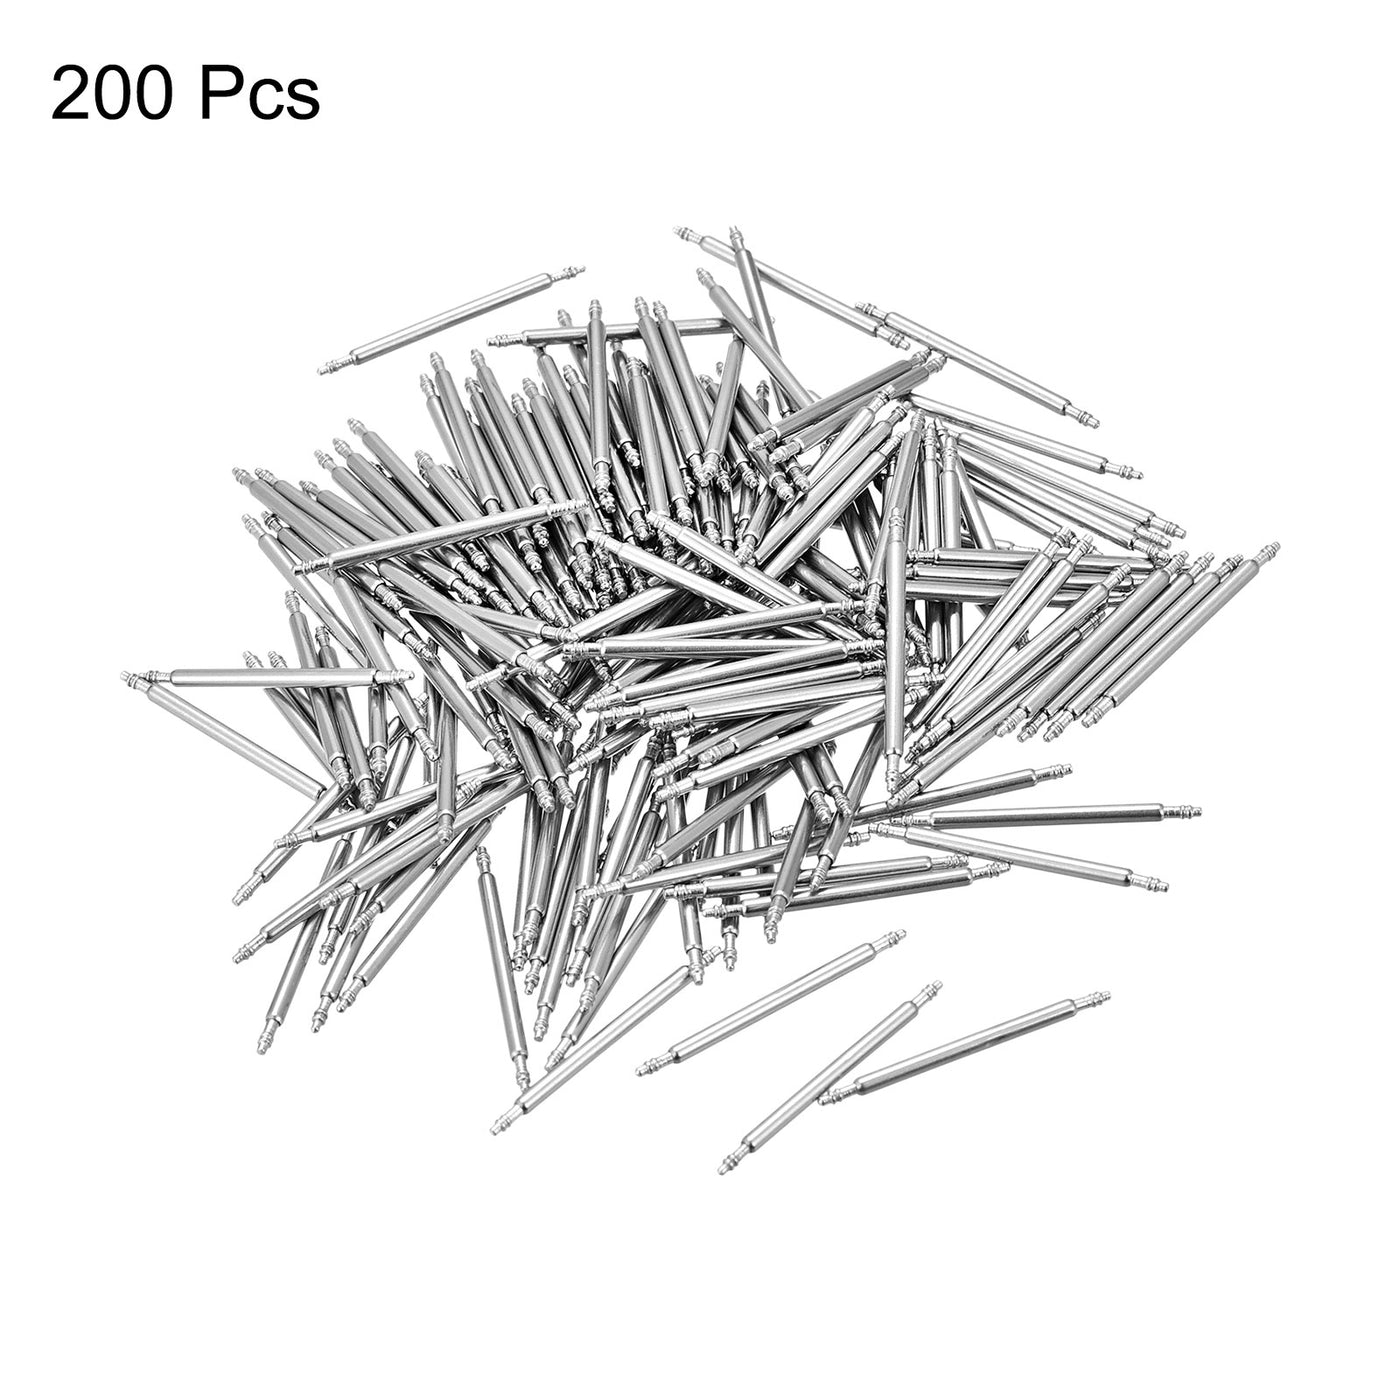 Uxcell Uxcell 200pcs Watch Band Link Pin 1.5mm Dia Spring Bar Pins for 9mm Watch Band Strap